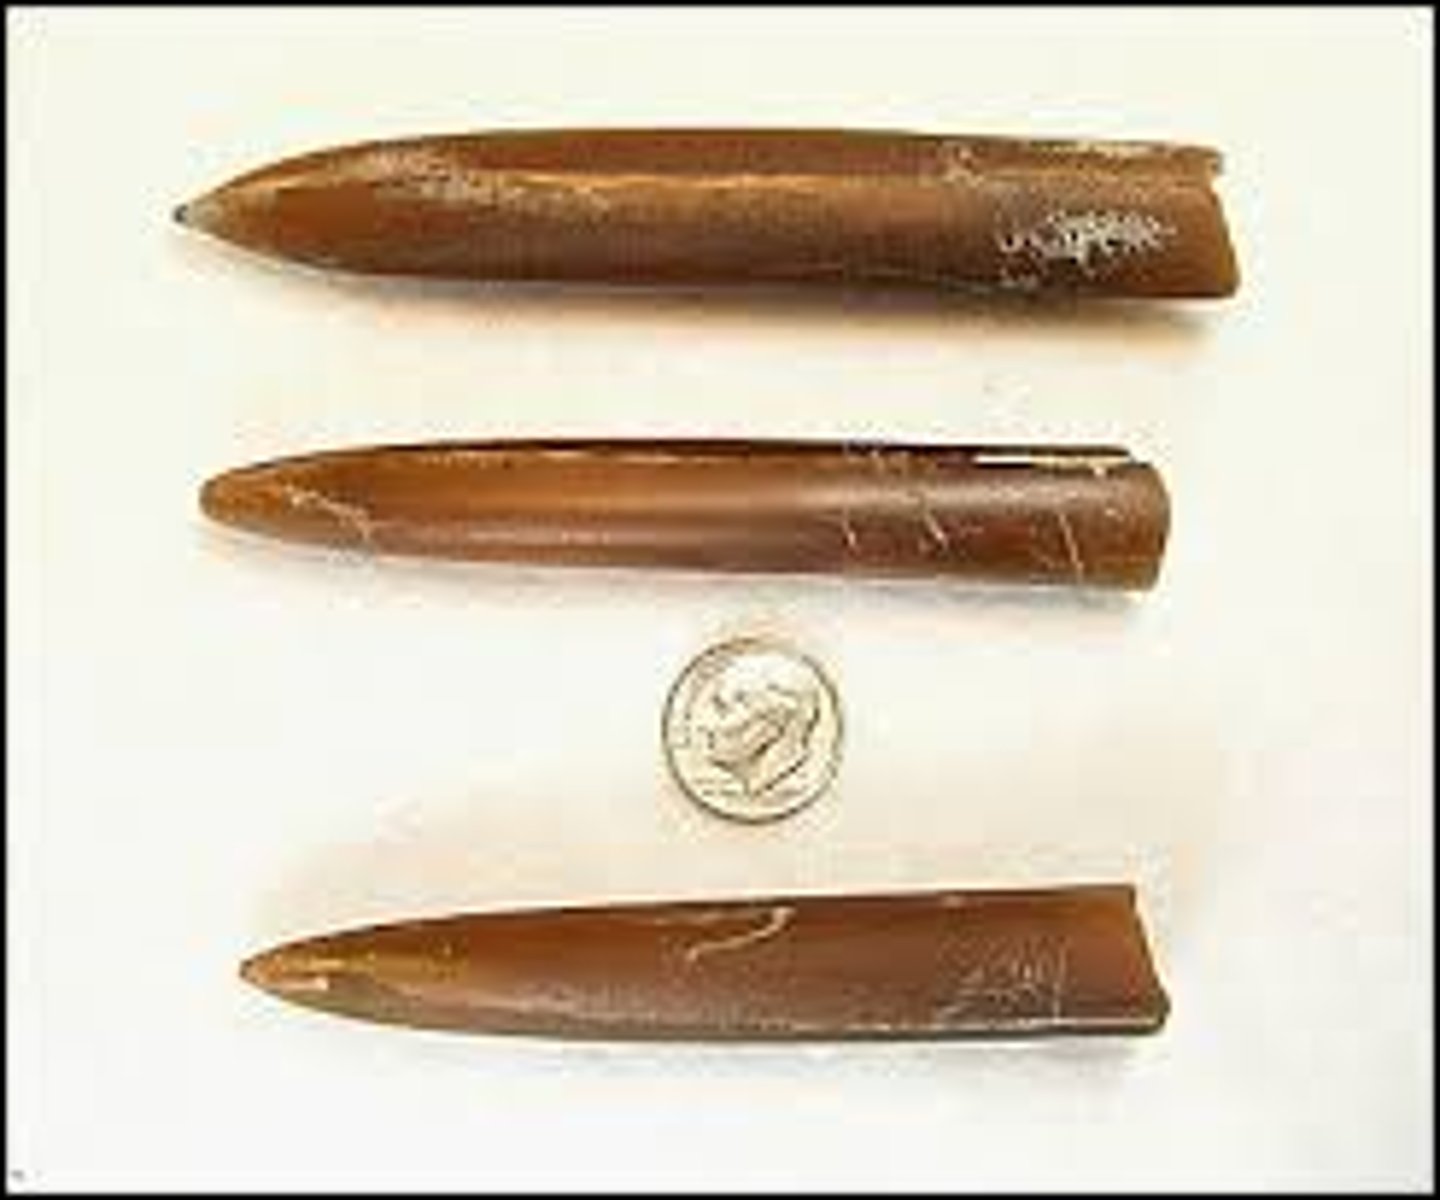 <p>a genus of belemnite from the Late Cretaceous of Europe and North America. -a squidlike animal, probably related to the ancestors of modern squids and cuttlefish.</p>